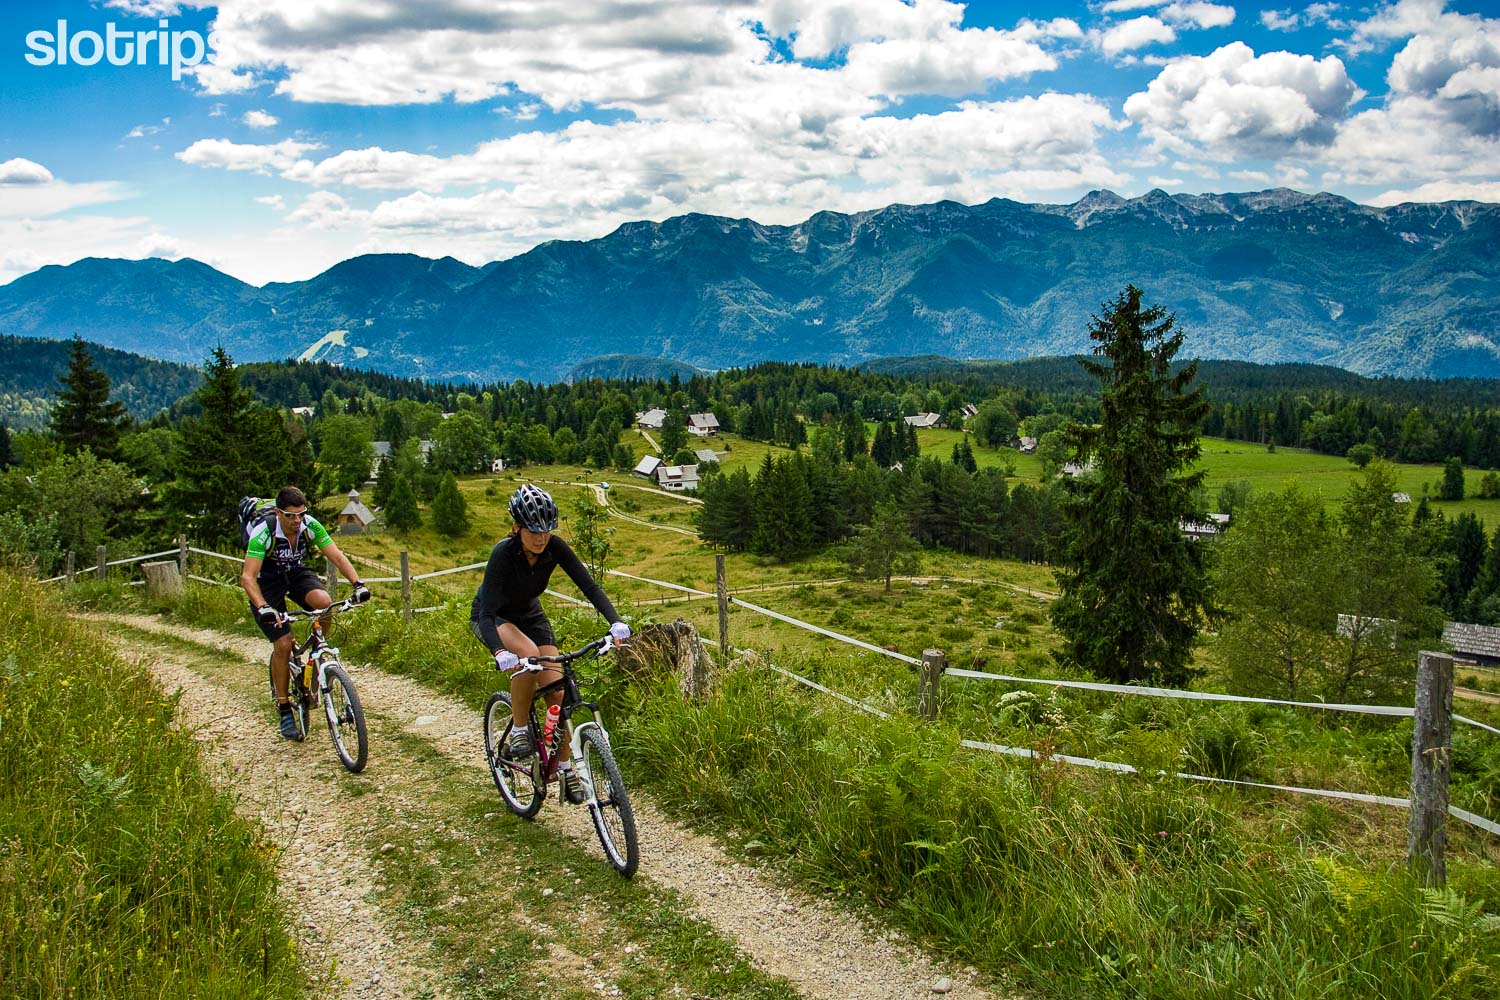 A couple on a mountain biking trip in the Julian Alps crossing an alpine pasture in the Slovenia Alps